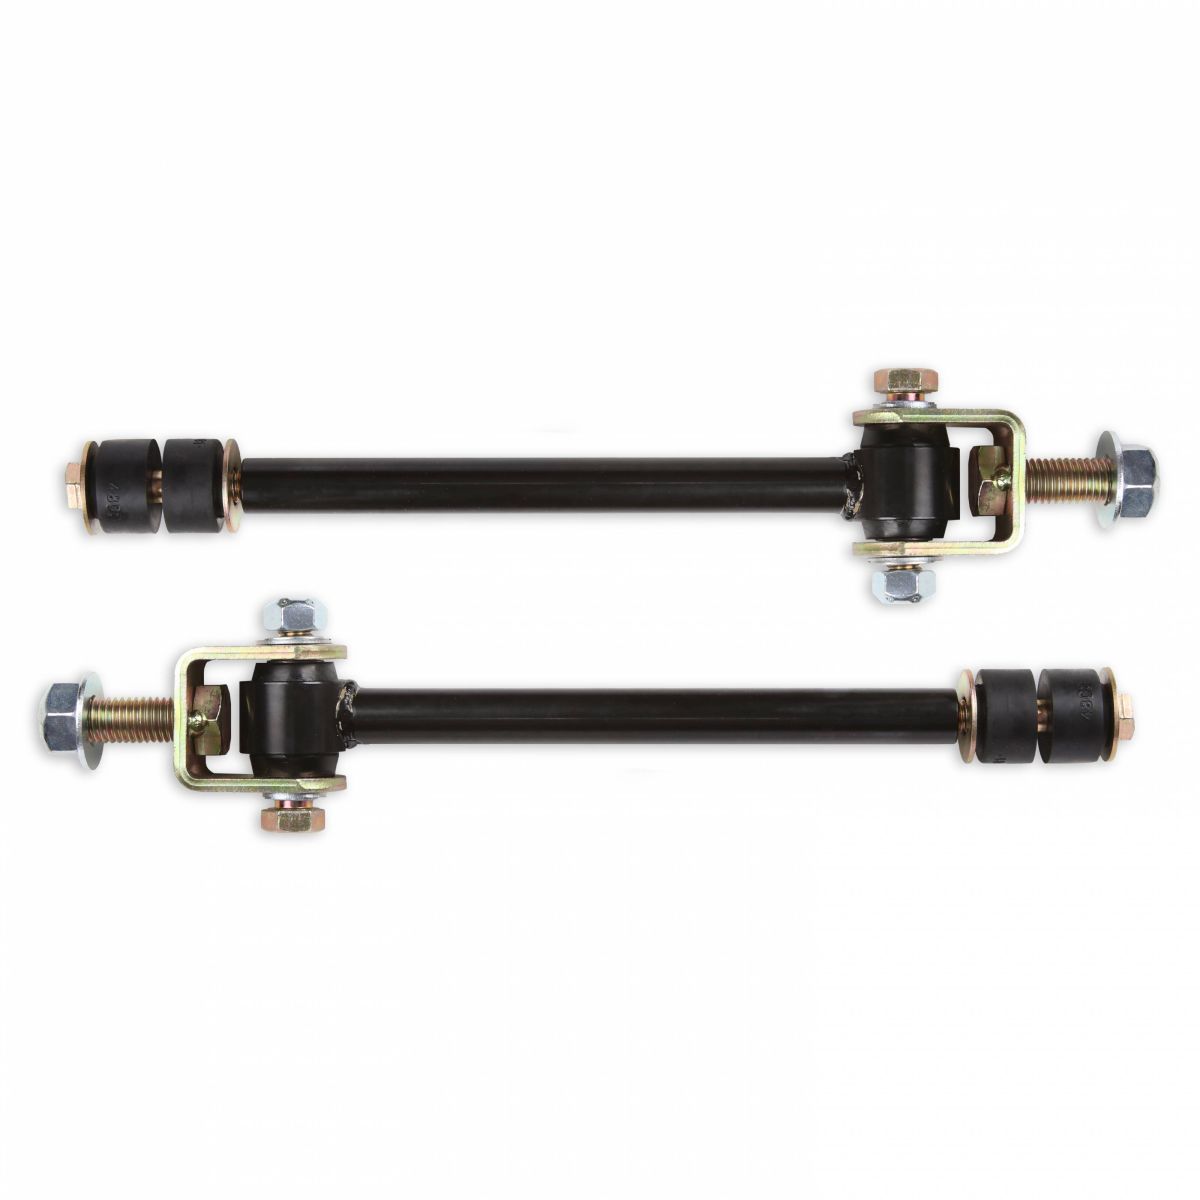 Cognito Motorsports Truck - Cognito Front Sway Bar End Link Kit For 10/12-Inch Lifts on 2001-2018 2500/3500